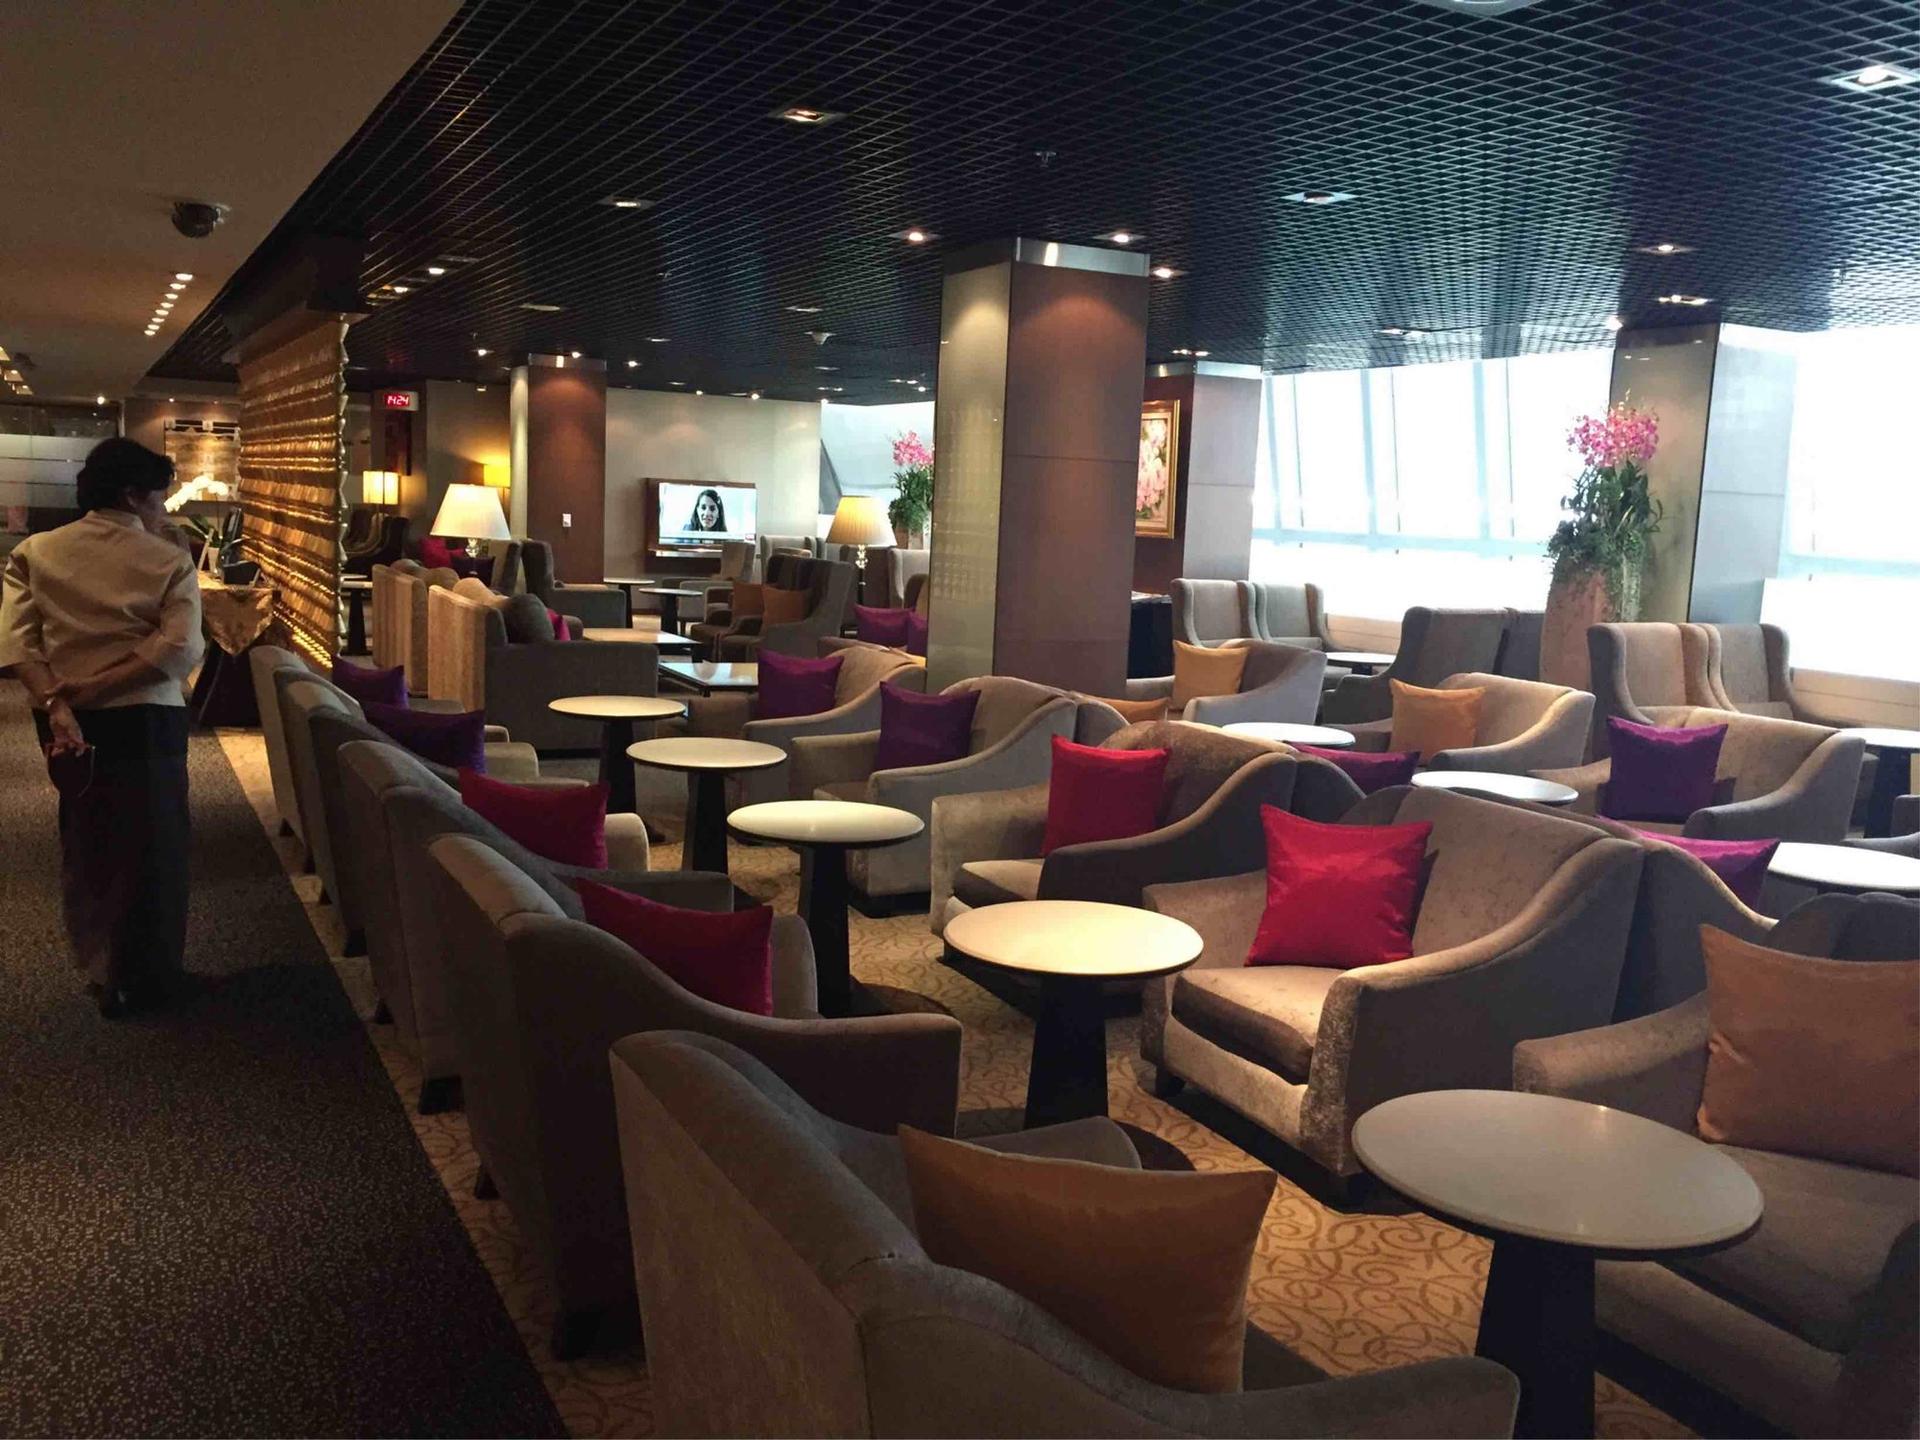 Thai Airways Royal First Class Lounge image 23 of 44